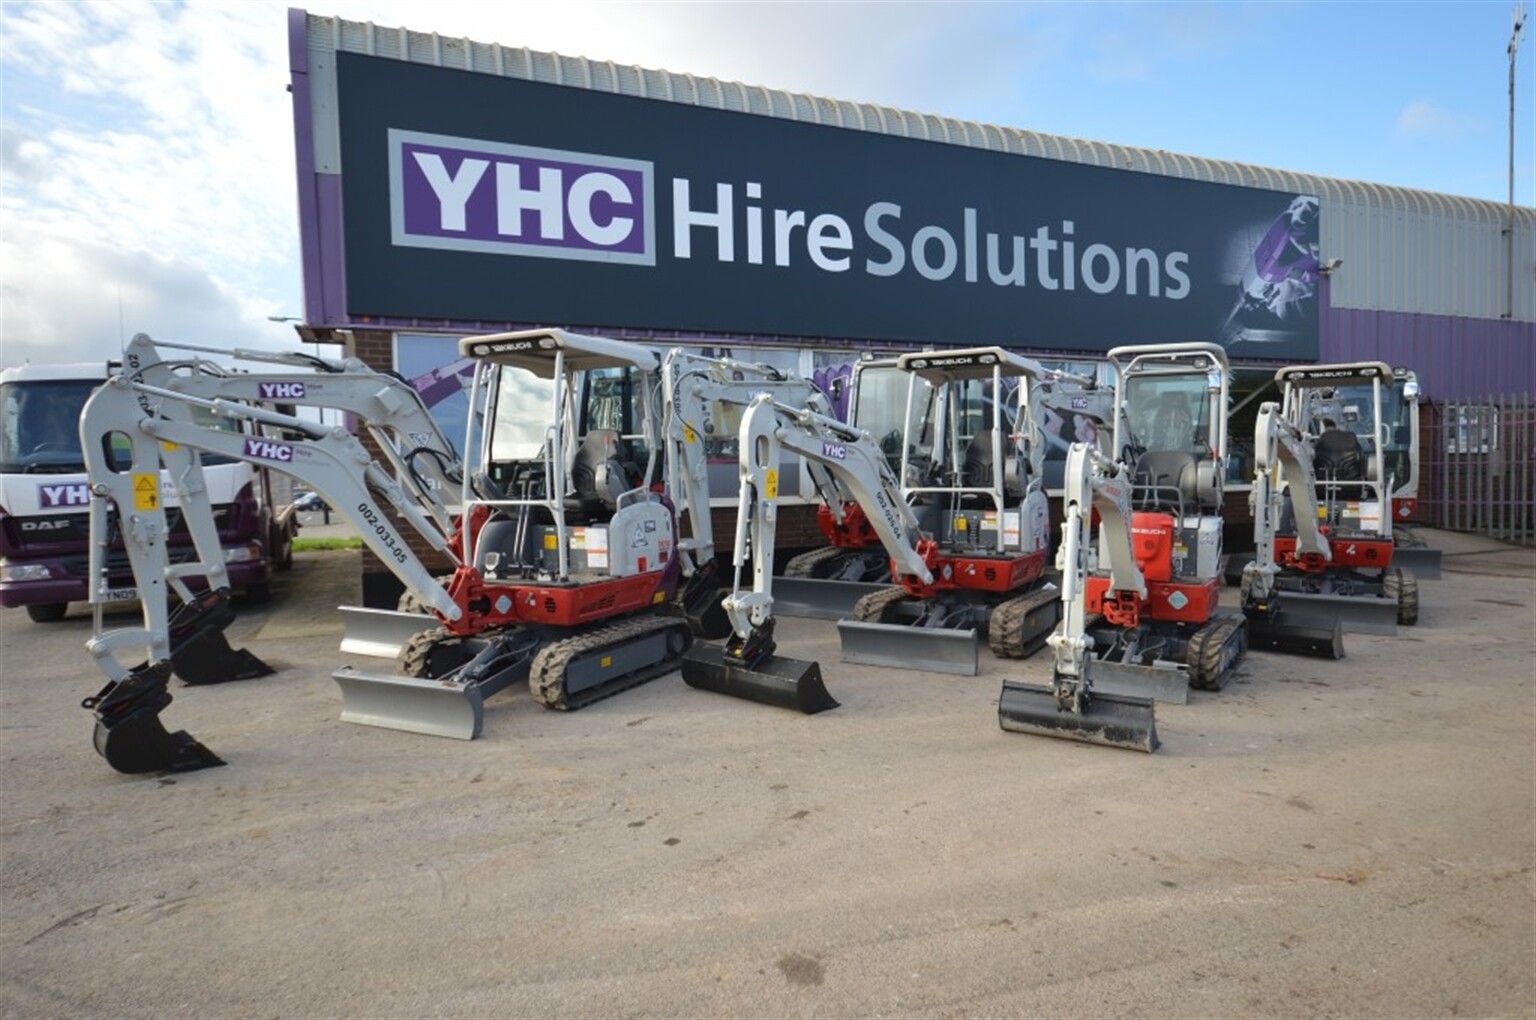 YHC dig deep, with an order for 49 Takeuchi Excavators from CBL